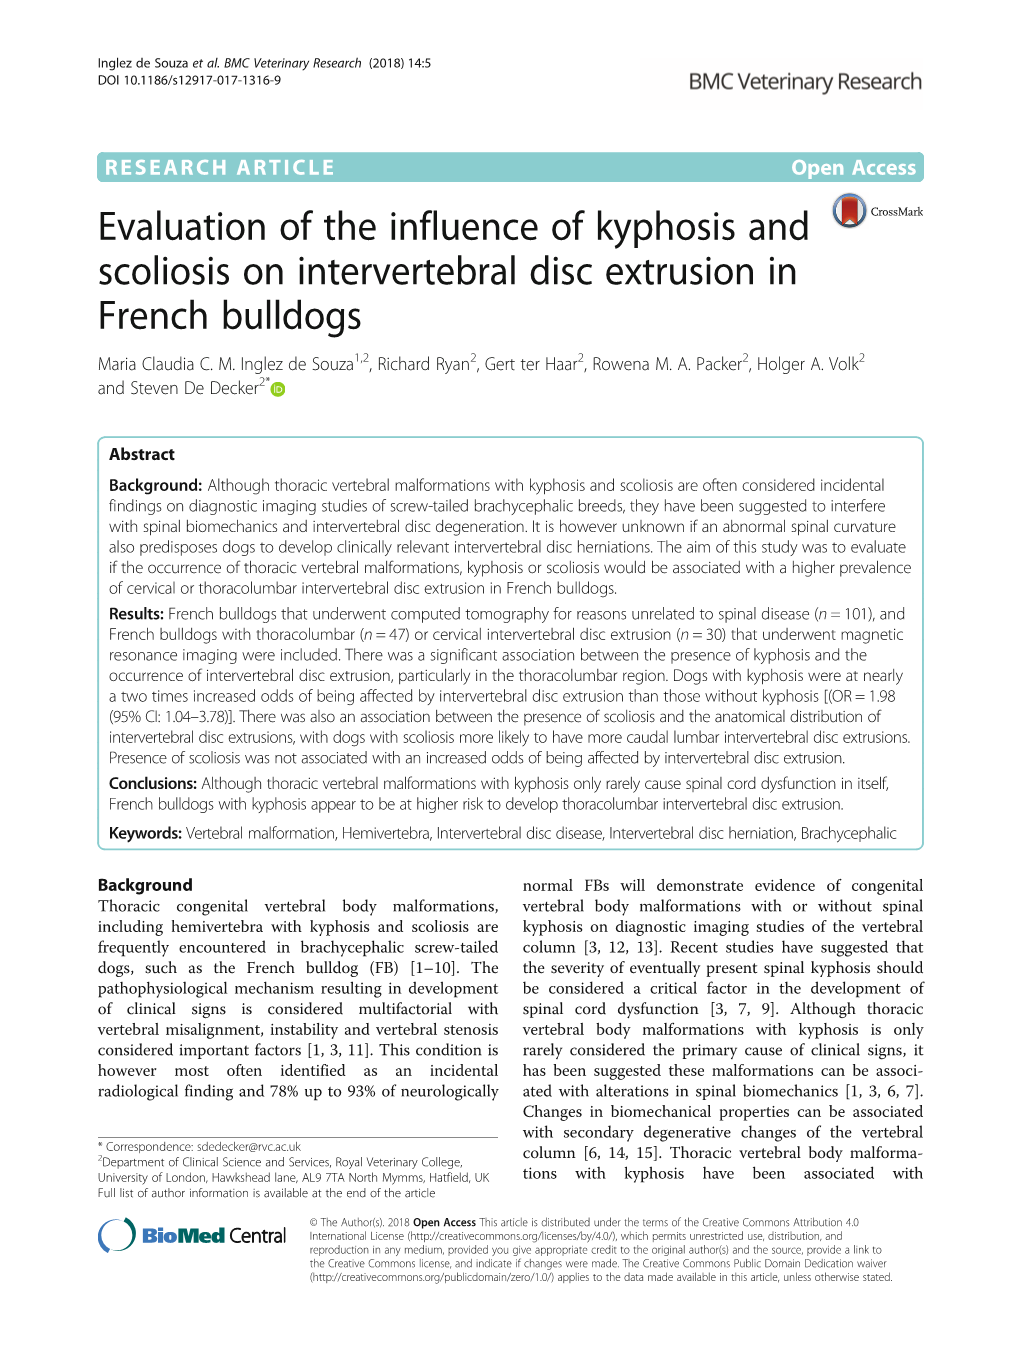 Evaluation of the Influence of Kyphosis and Scoliosis on Intervertebral Disc Extrusion in French Bulldogs Maria Claudia C